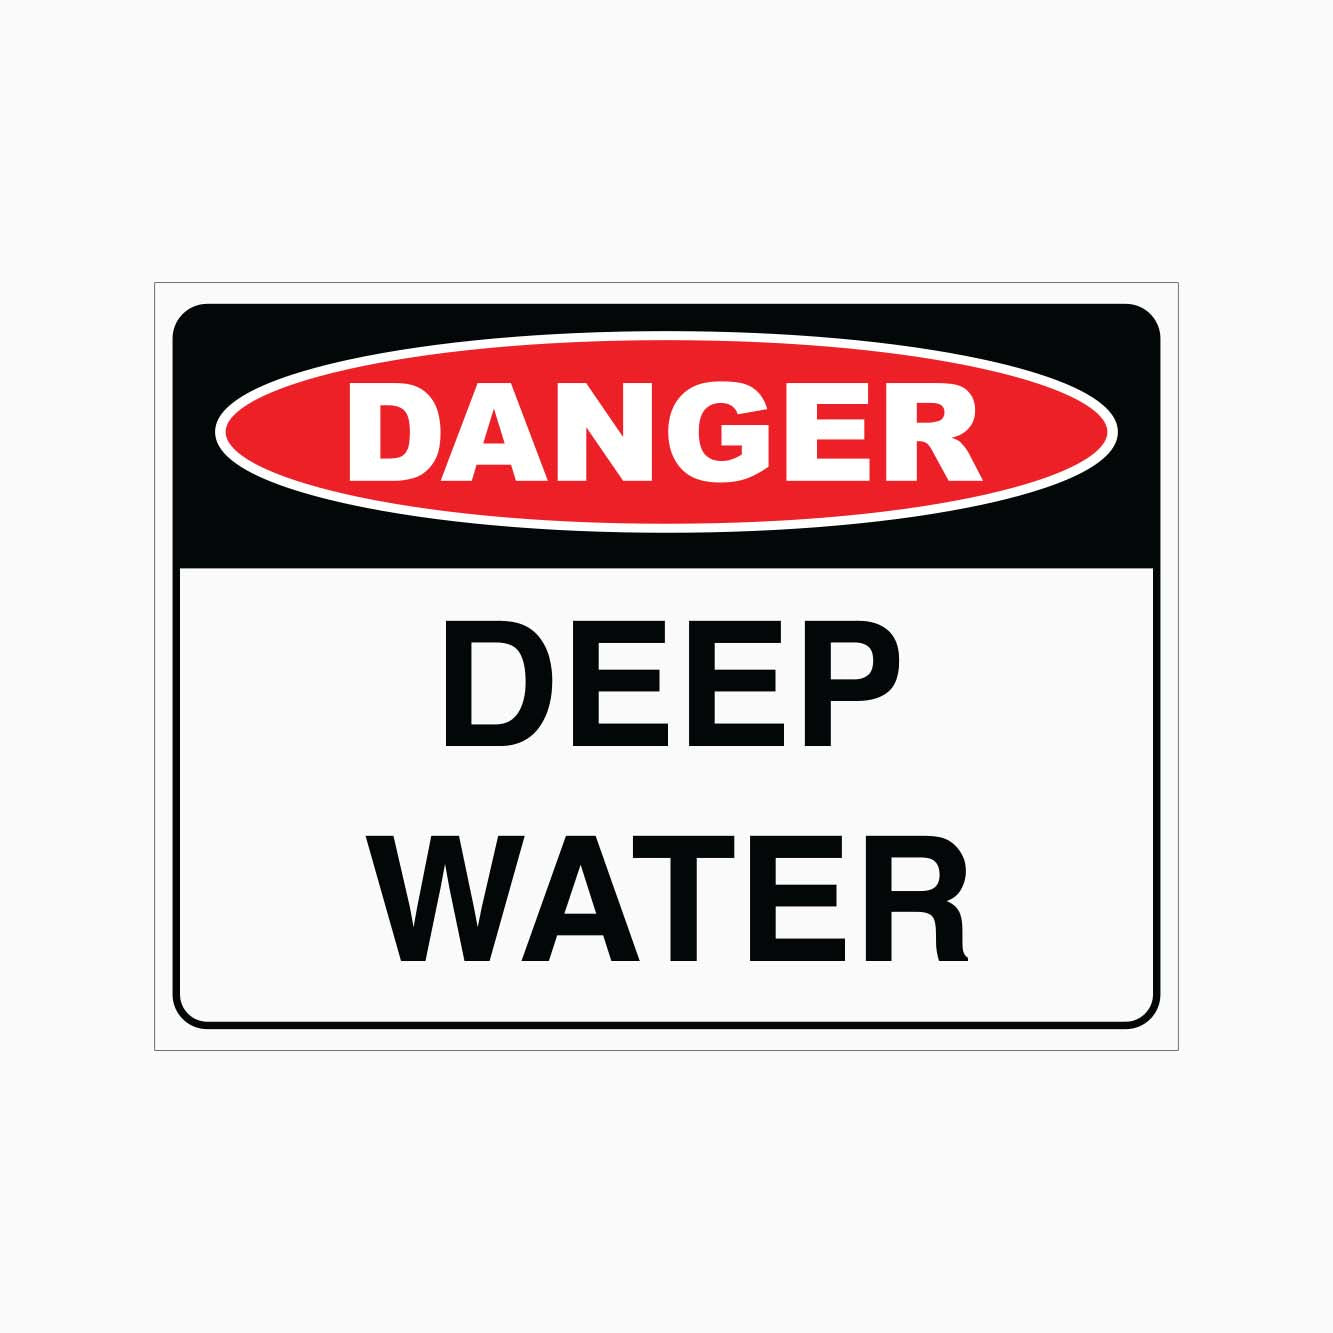 DANGER DEEP WATER SIGN - GET SIGNS - SAFETY SIGNS IN AUSTRALIA